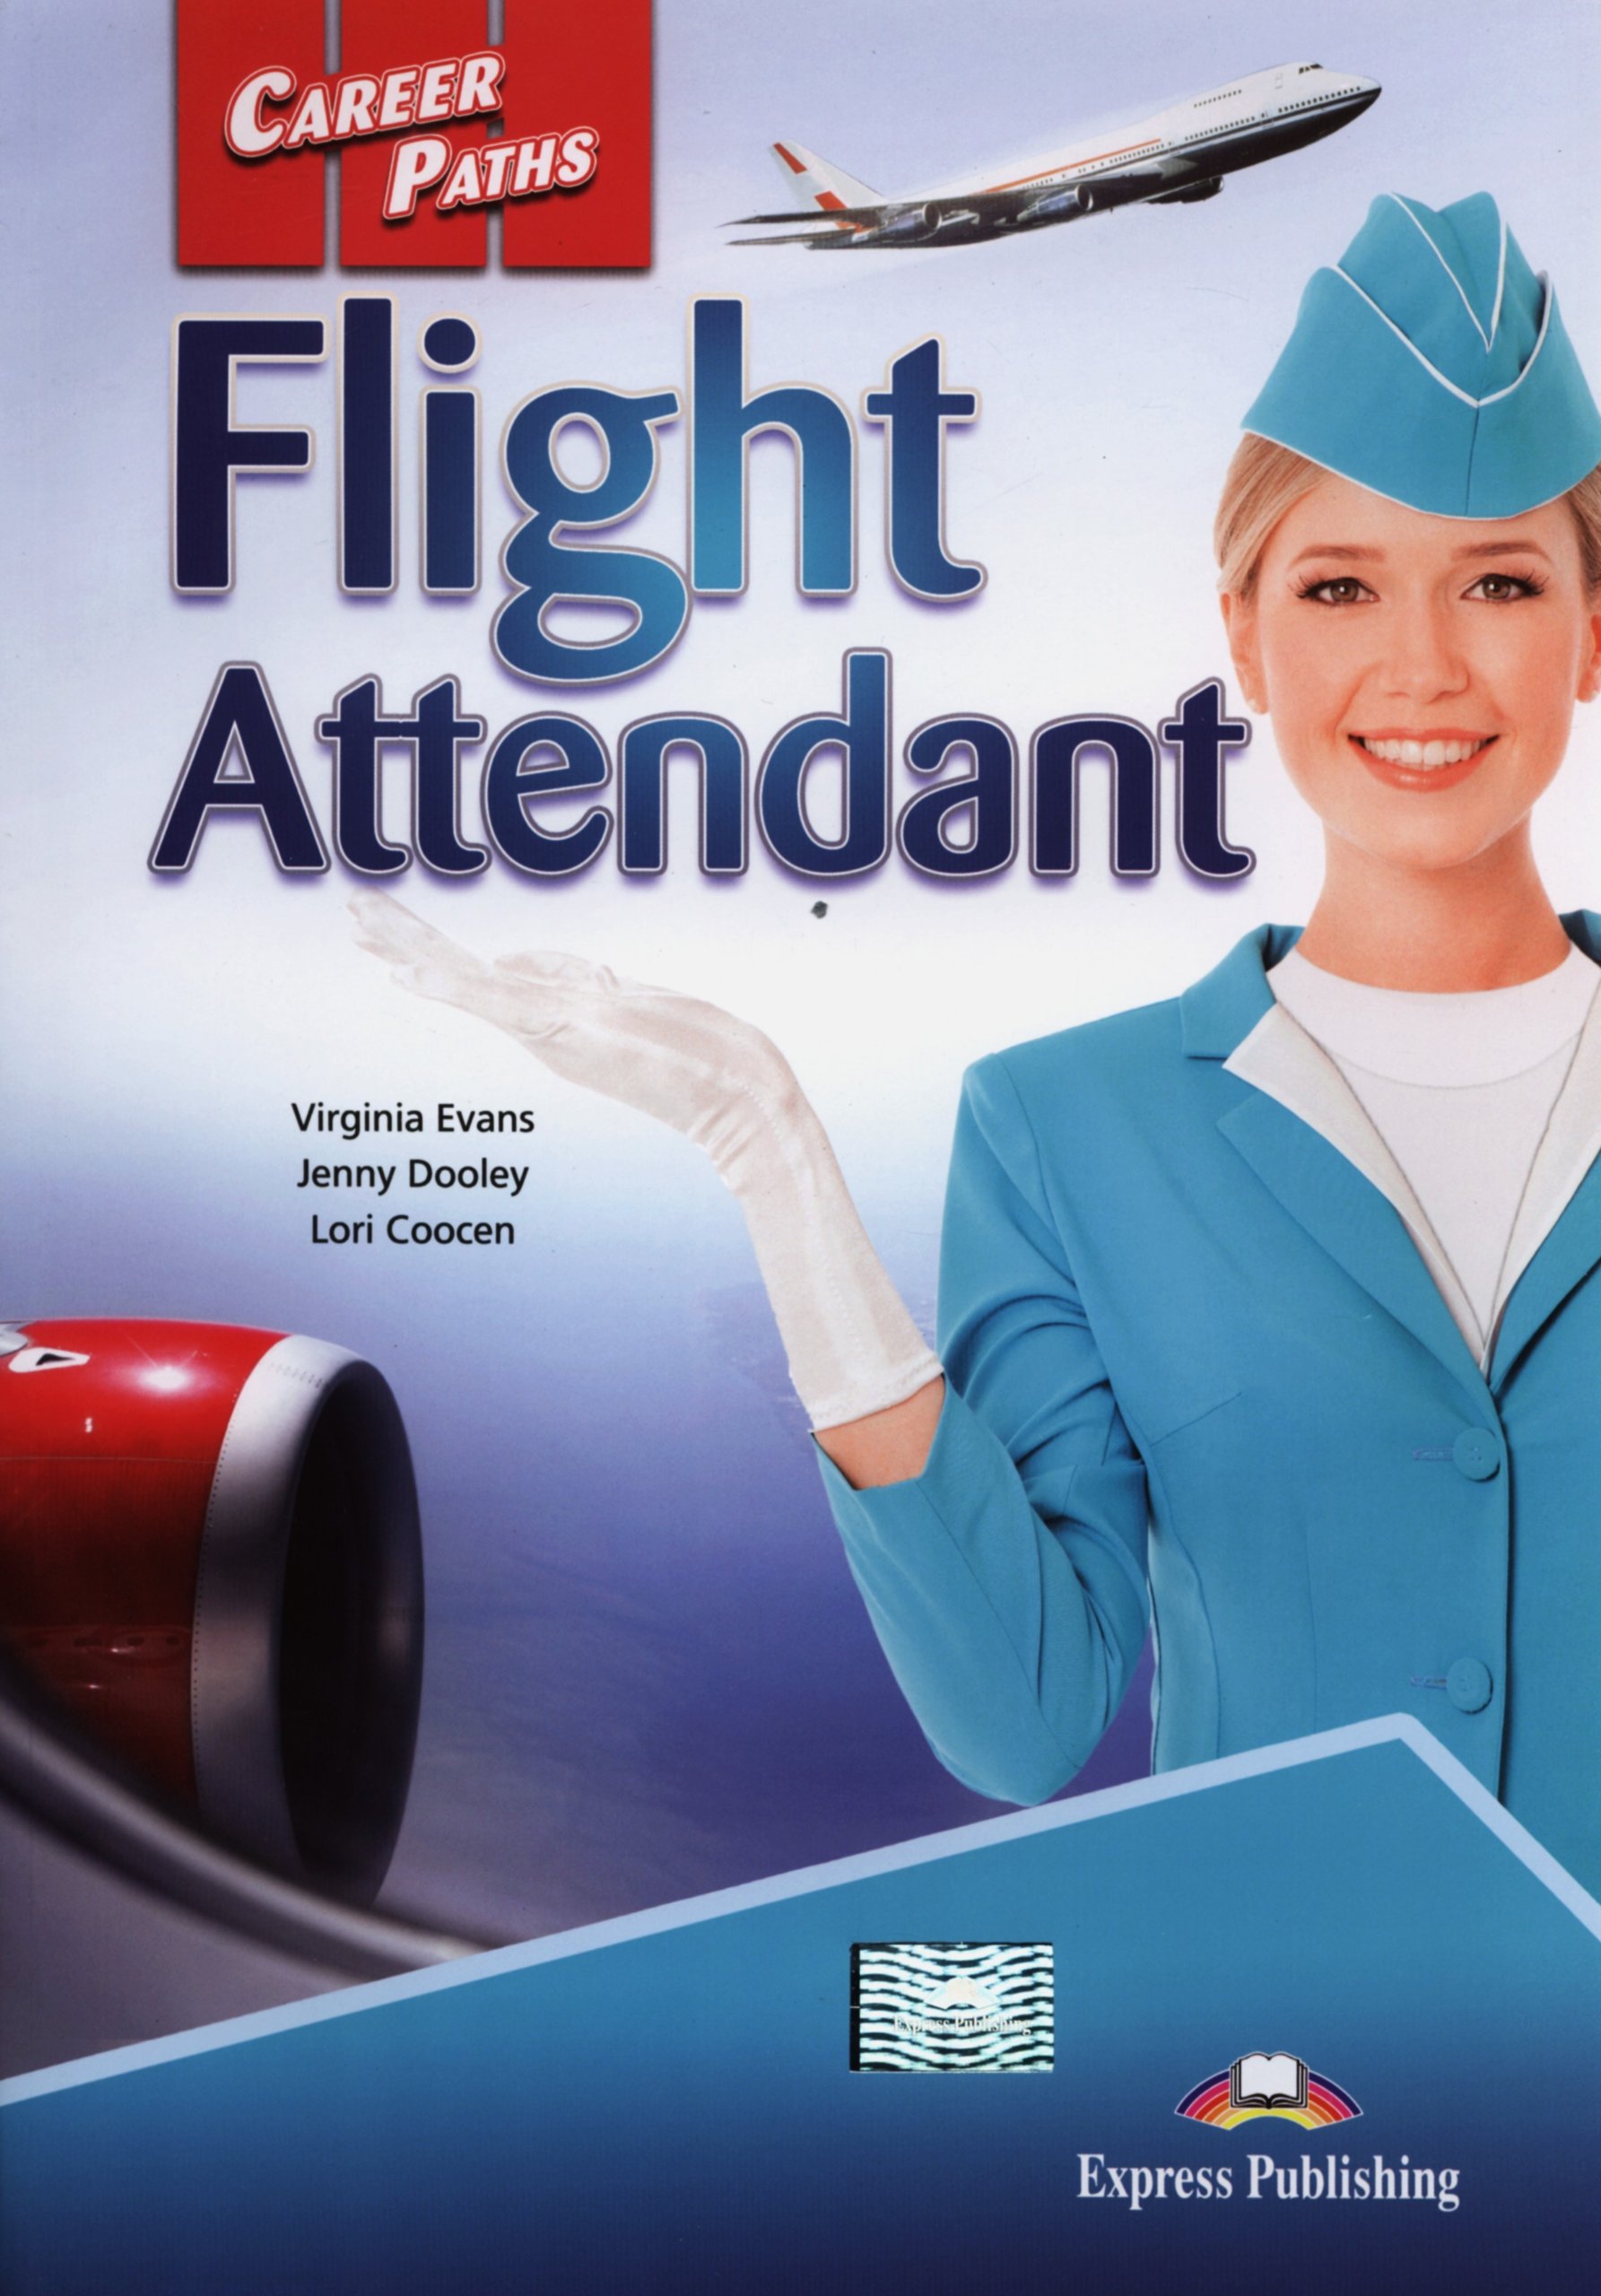 FLIGHT ATTENDANT (CAREER PATHS) Student's Book With Digibook App